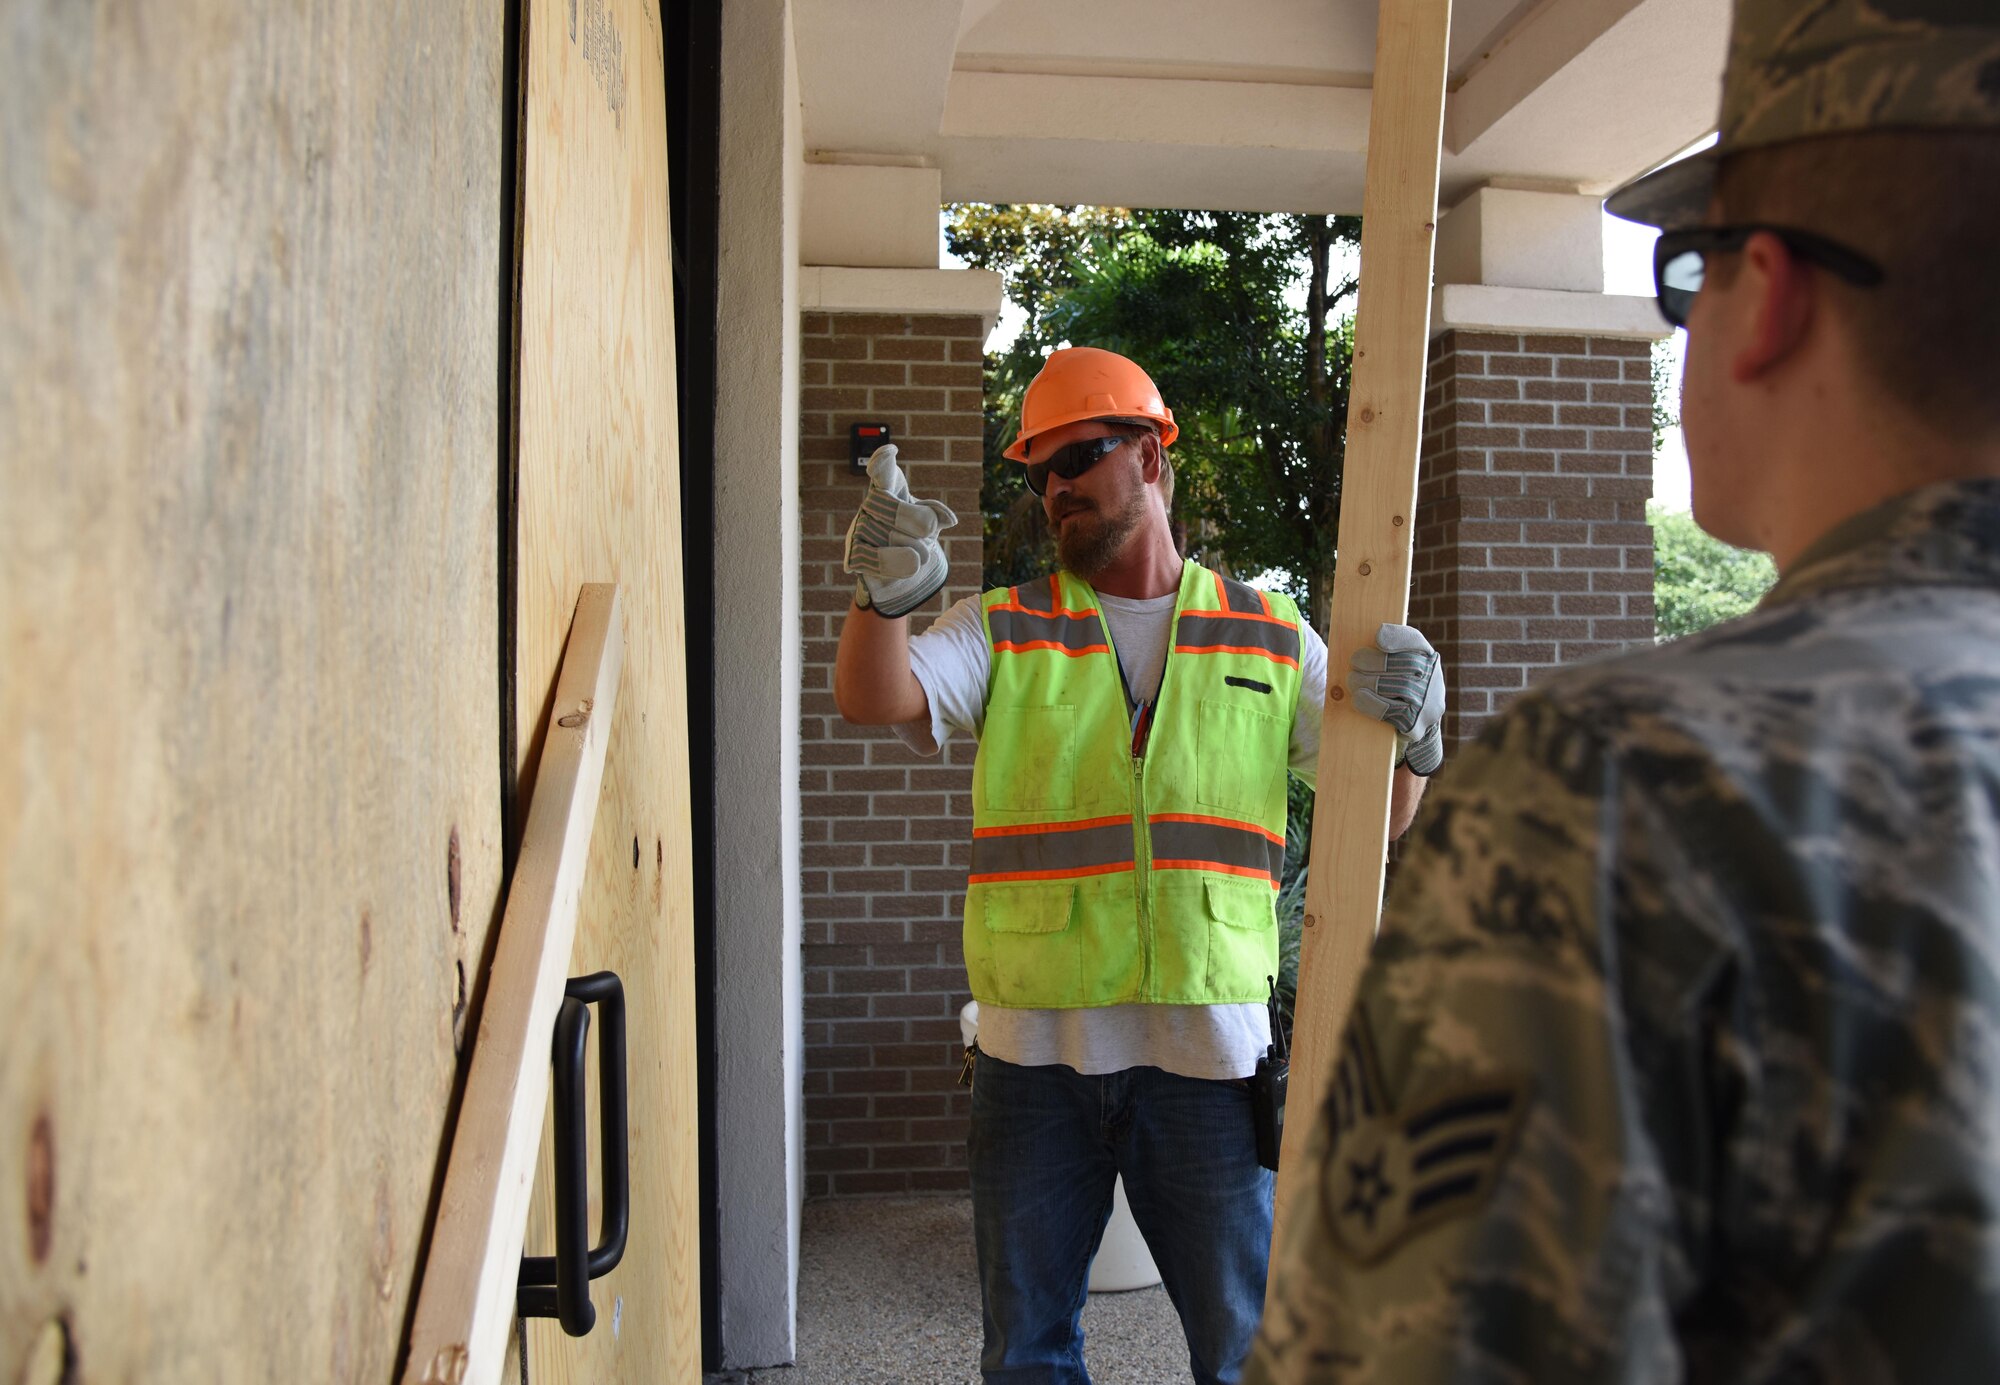 Jeremy Railey, Base Operations Support carpenter, explains boarding procedures to Senior Airman Taylor Vann, 81st Training Wing command section administrator, at the 81st TRW headquarters building during a hurricane exercise July 18, 2017, on Keesler Air Force Base, Miss. The purpose of the exercise was to prepare Keesler for the current hurricane season. (U.S. Air Force photo by Kemberly Groue)